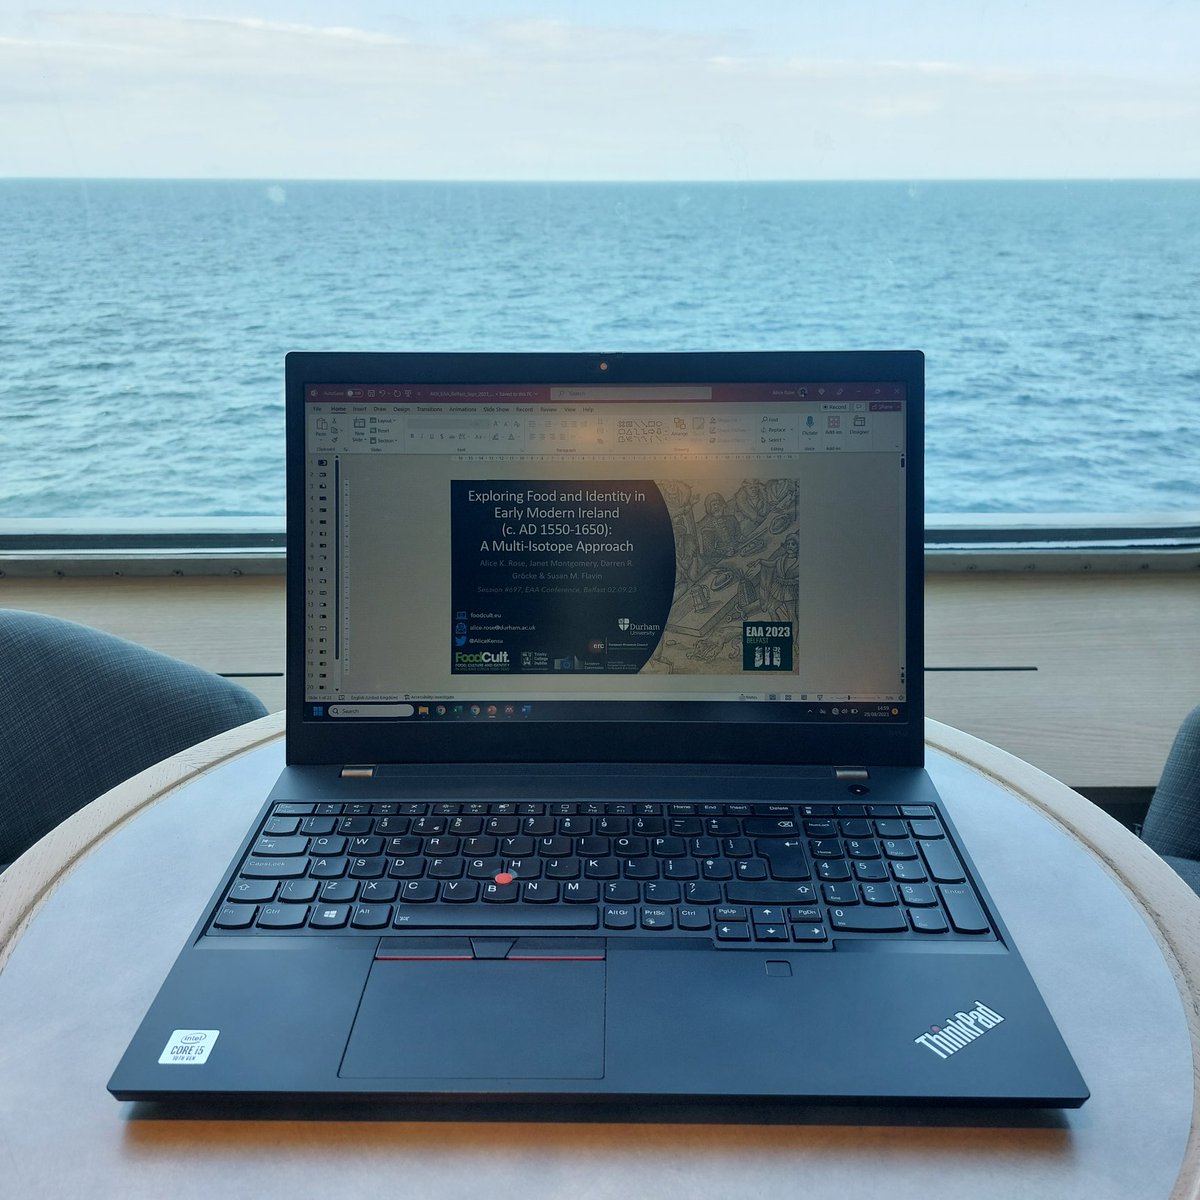 Enjoying 'Working From Sea' this afternoon! Running through my #EAA2023 presentation on diet in Early Modern Ireland which I will be presenting in session 697 on Saturday